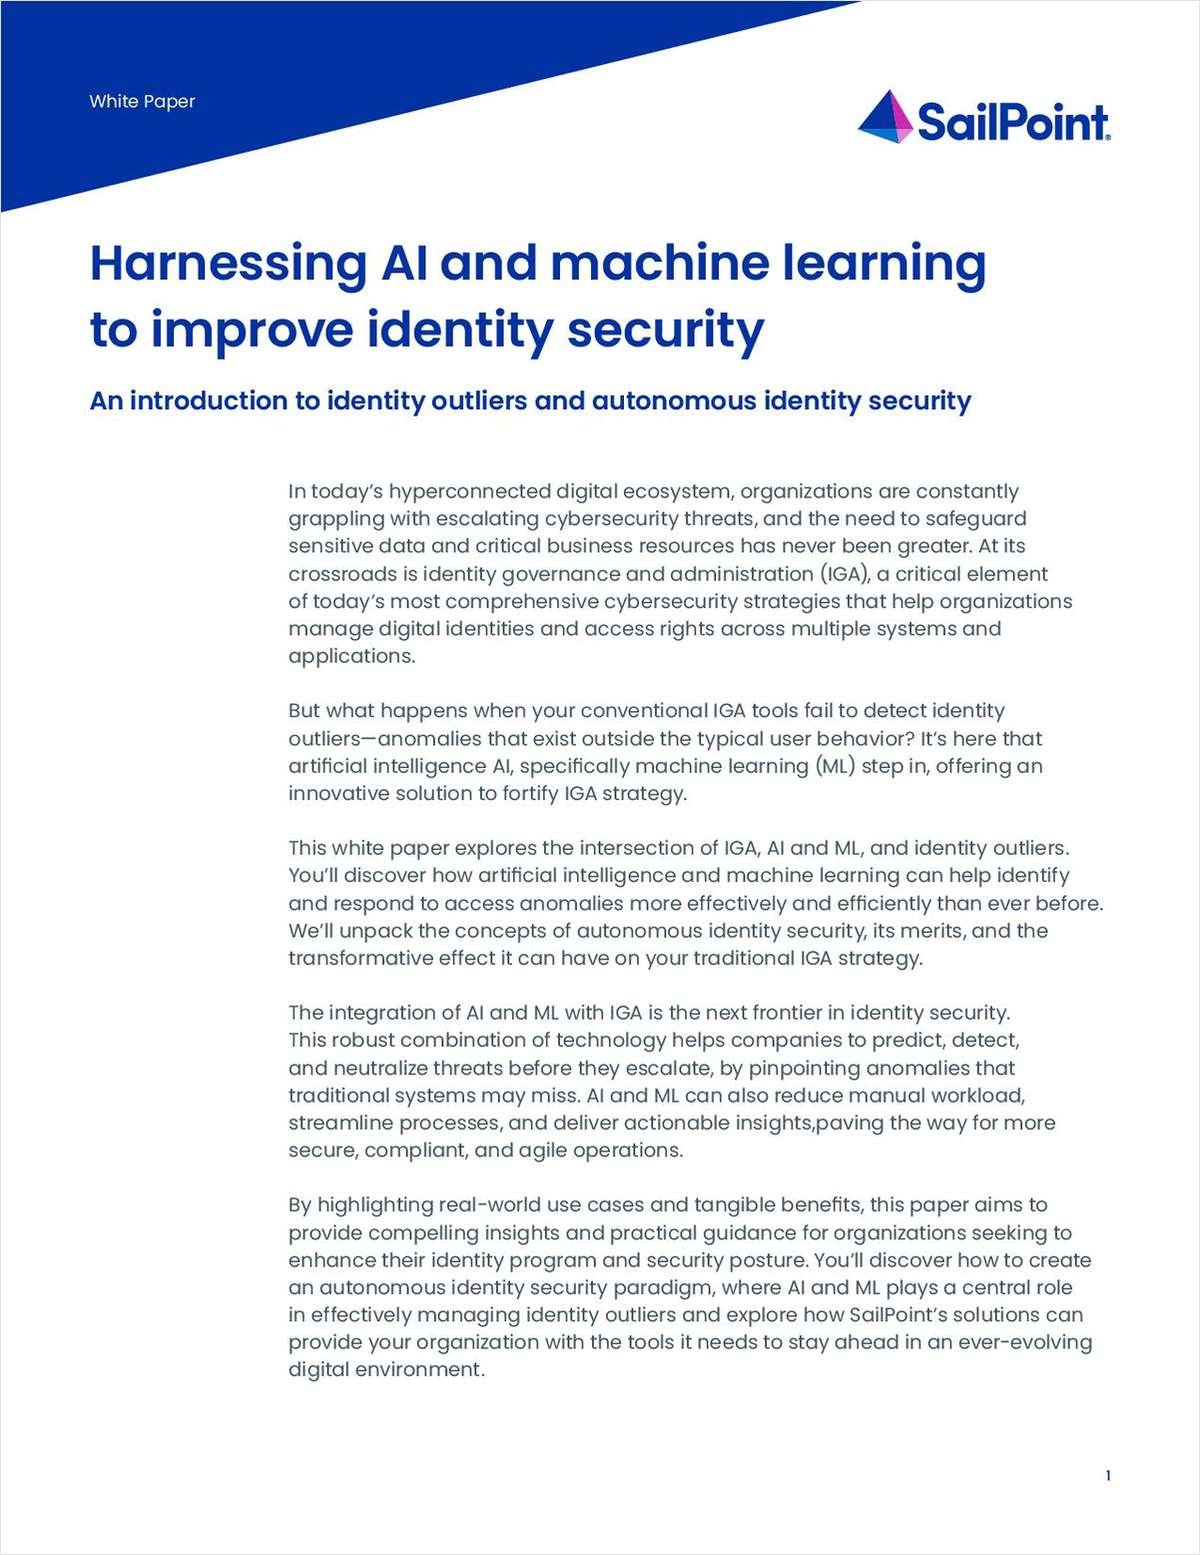 Improve Identity Security by Harnessing AI and Machine Learning